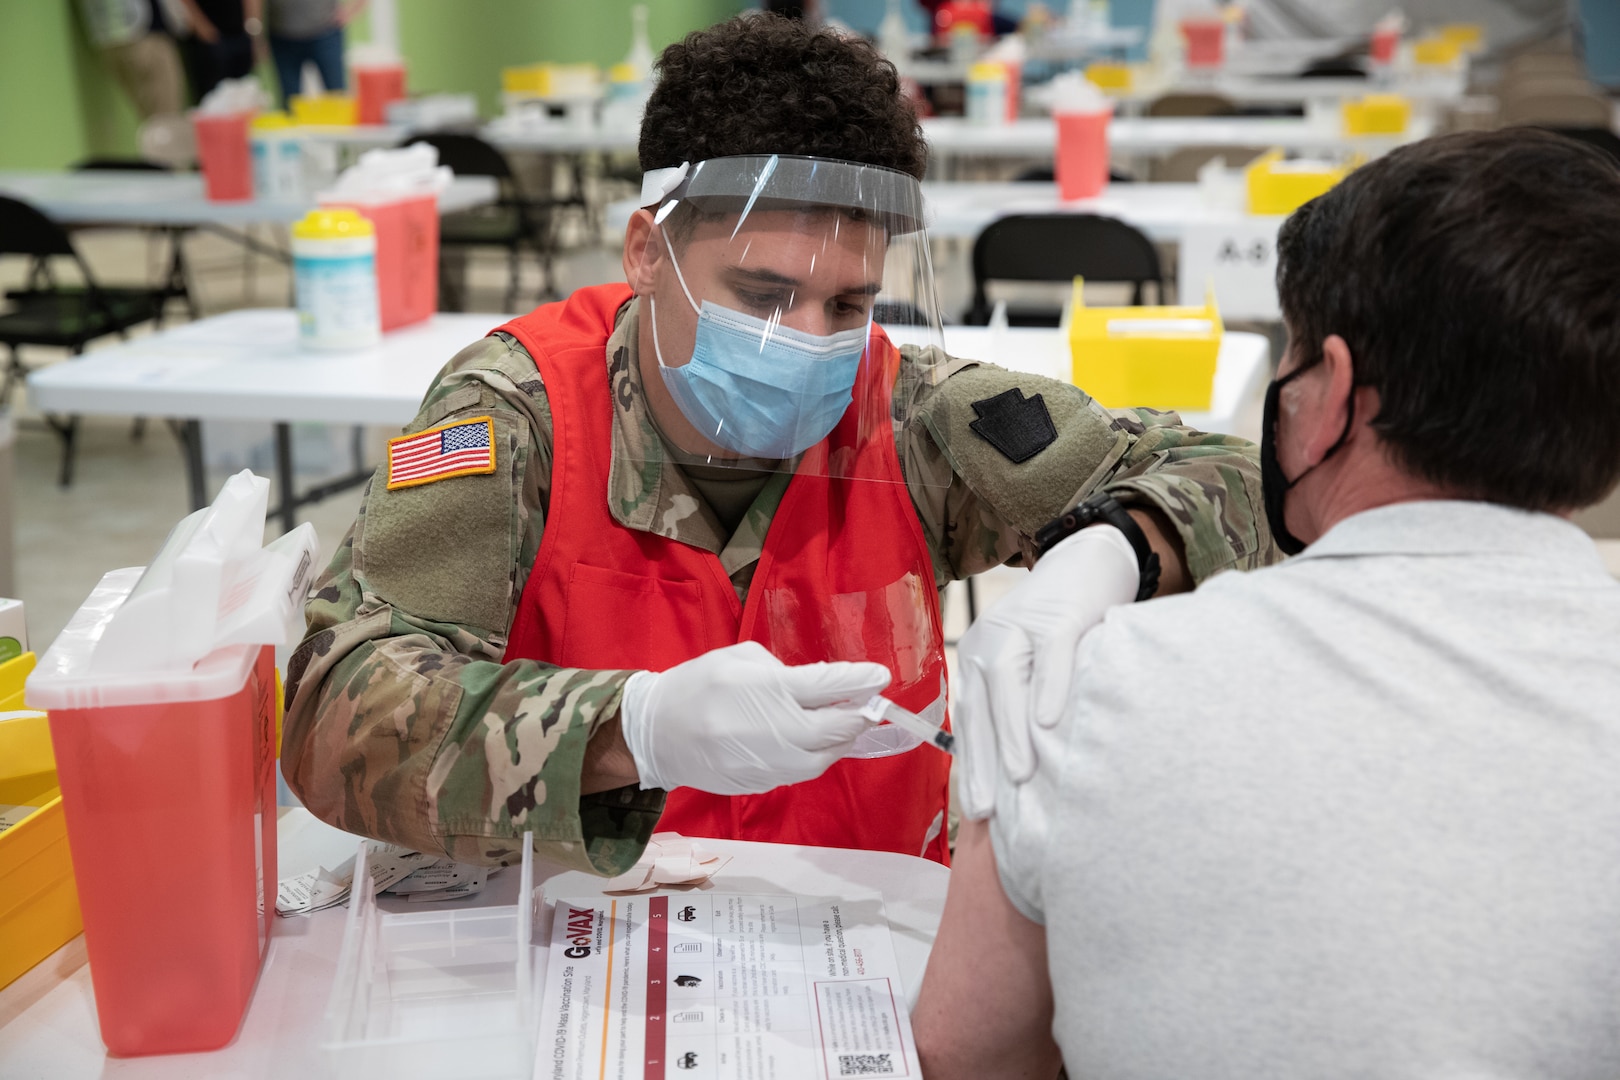 Spc. Isiah Bingham, a health care specialist with the Maryland Army National Guard’s Headquarters and Headquarters Company, 1st Battalion, 175th Infantry Regiment, administers a COVID-19 vaccine at a mass vaccination site in Hagerstown, Maryland, March 26, 2021. The site was the sixth COVID-19 mass vaccination site set up in Maryland.